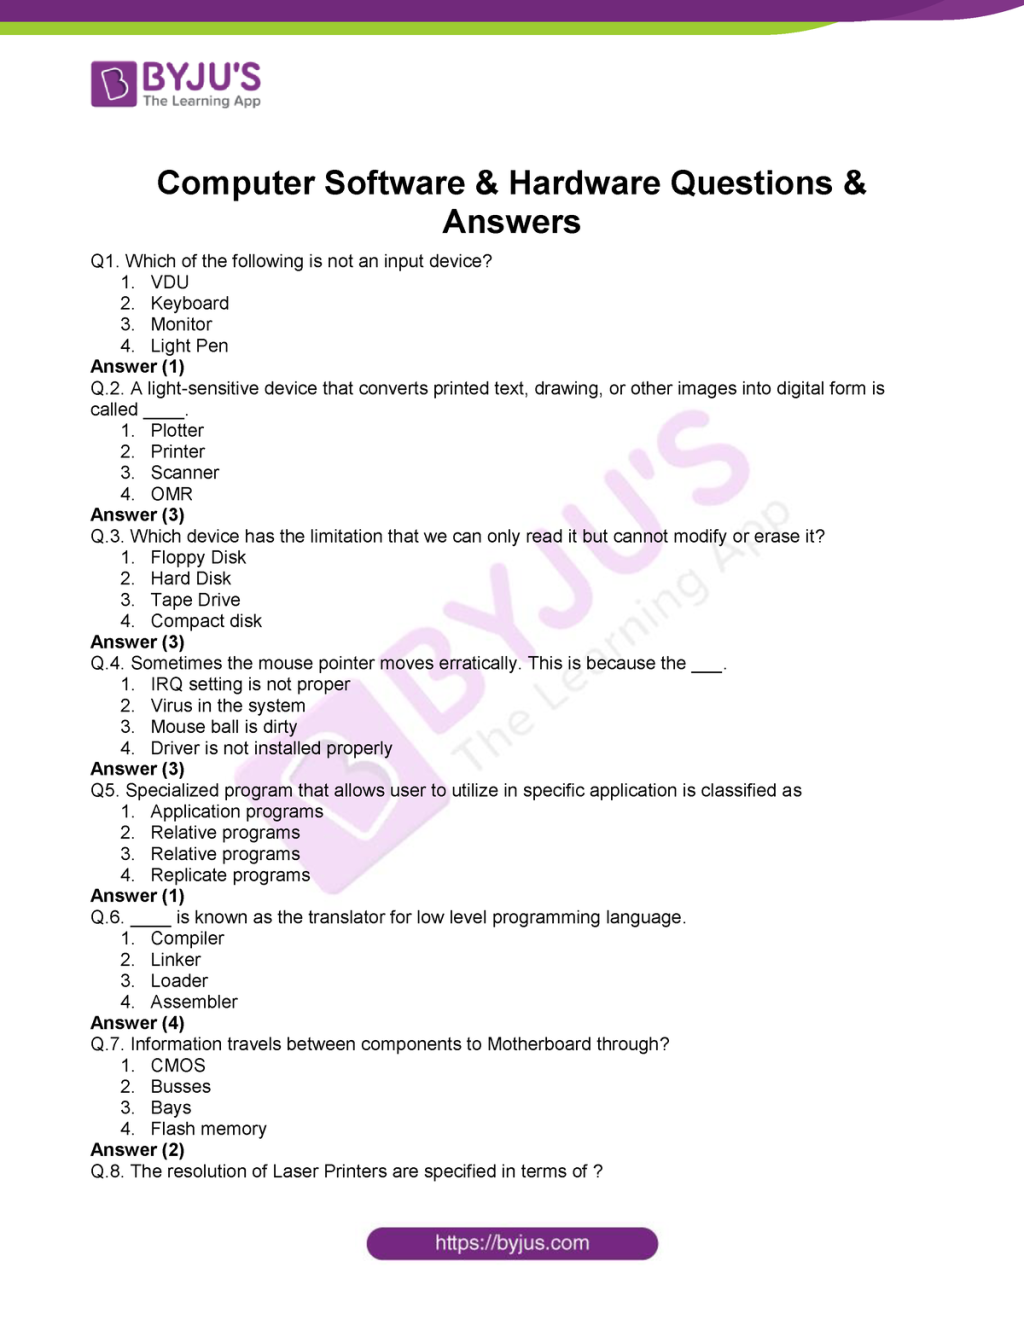 Picture of: Computer Hardware Software Questions Answers dfghs dhj hsdfksd